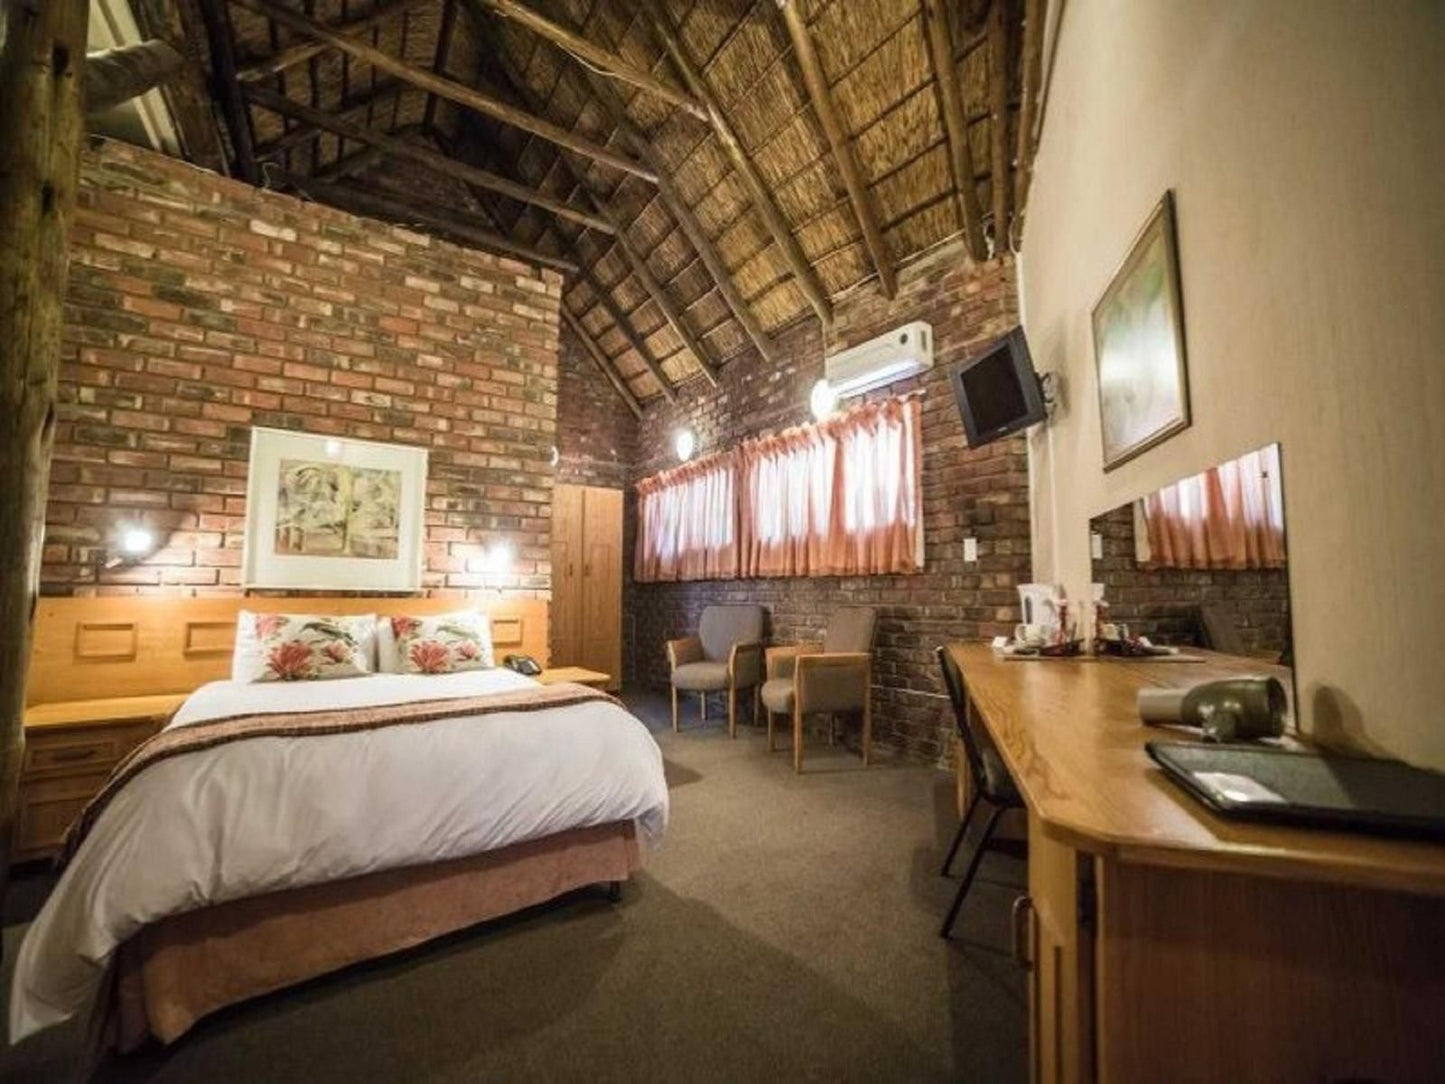 Acacia Guesthouse Wilkoppies Klerksdorp North West Province South Africa Bedroom